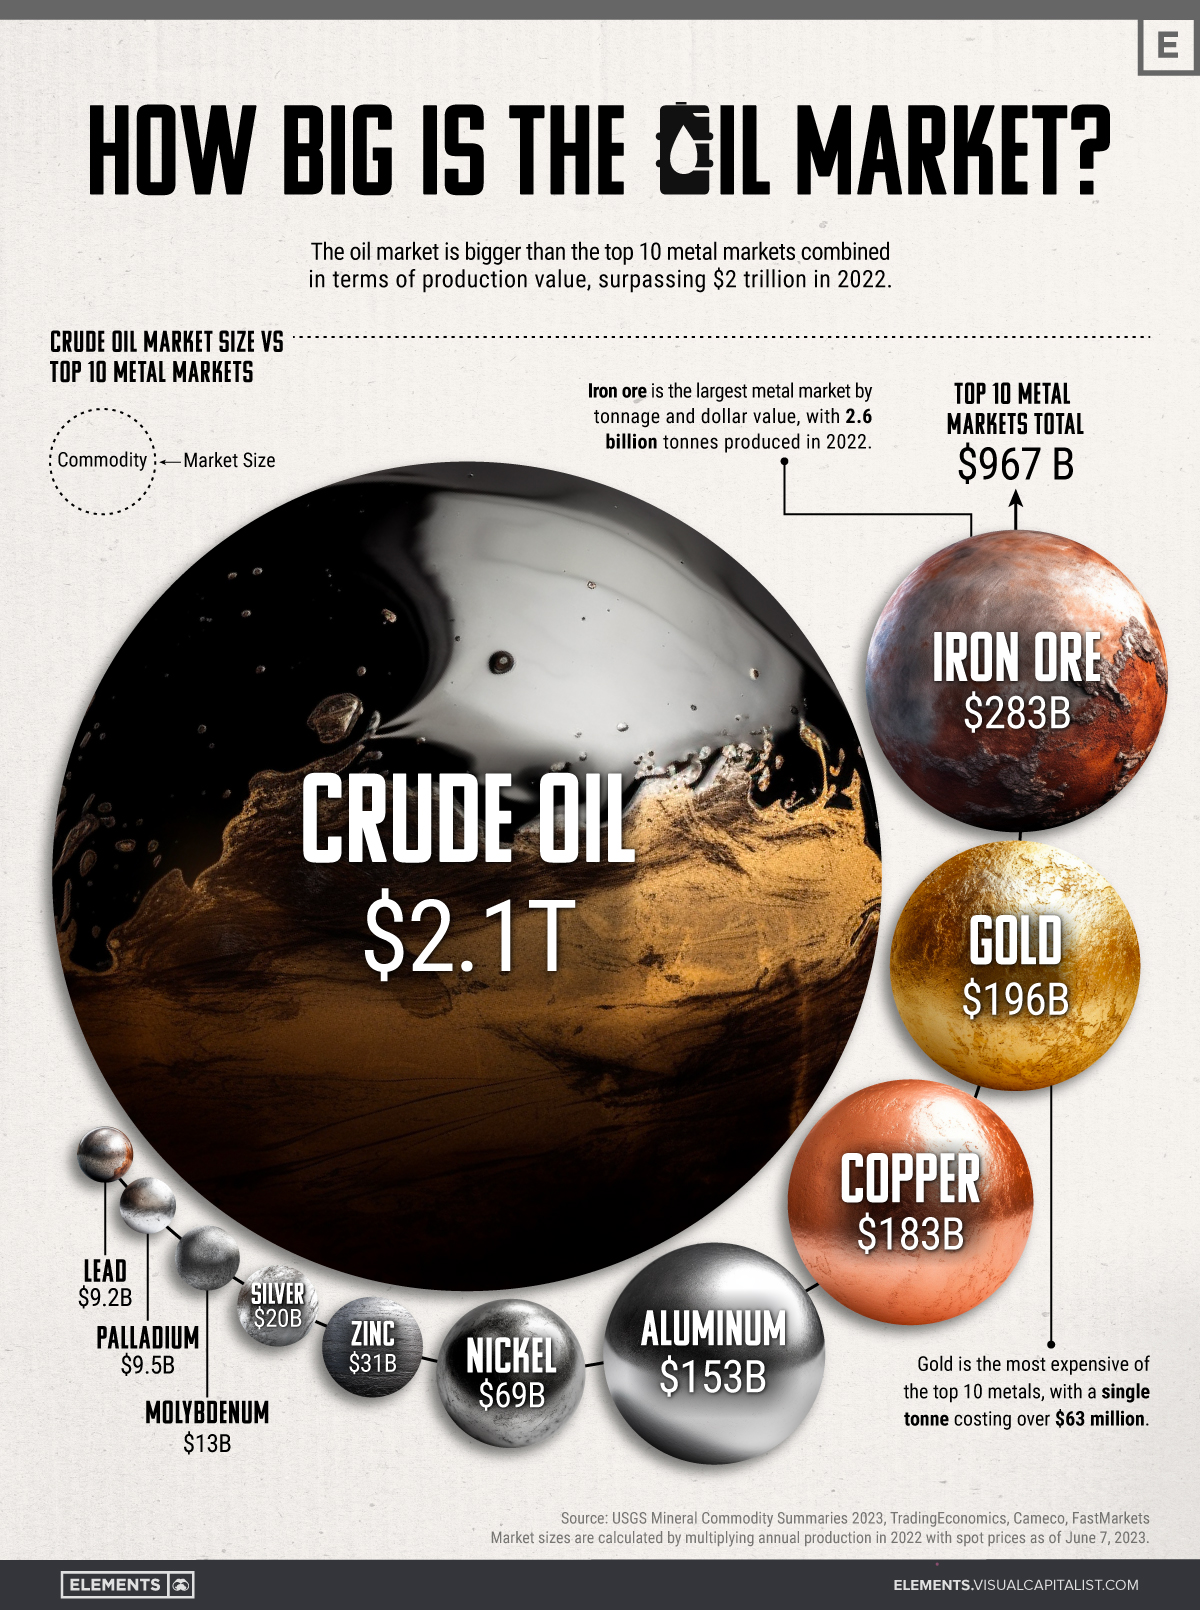 How big is the crude oil market?